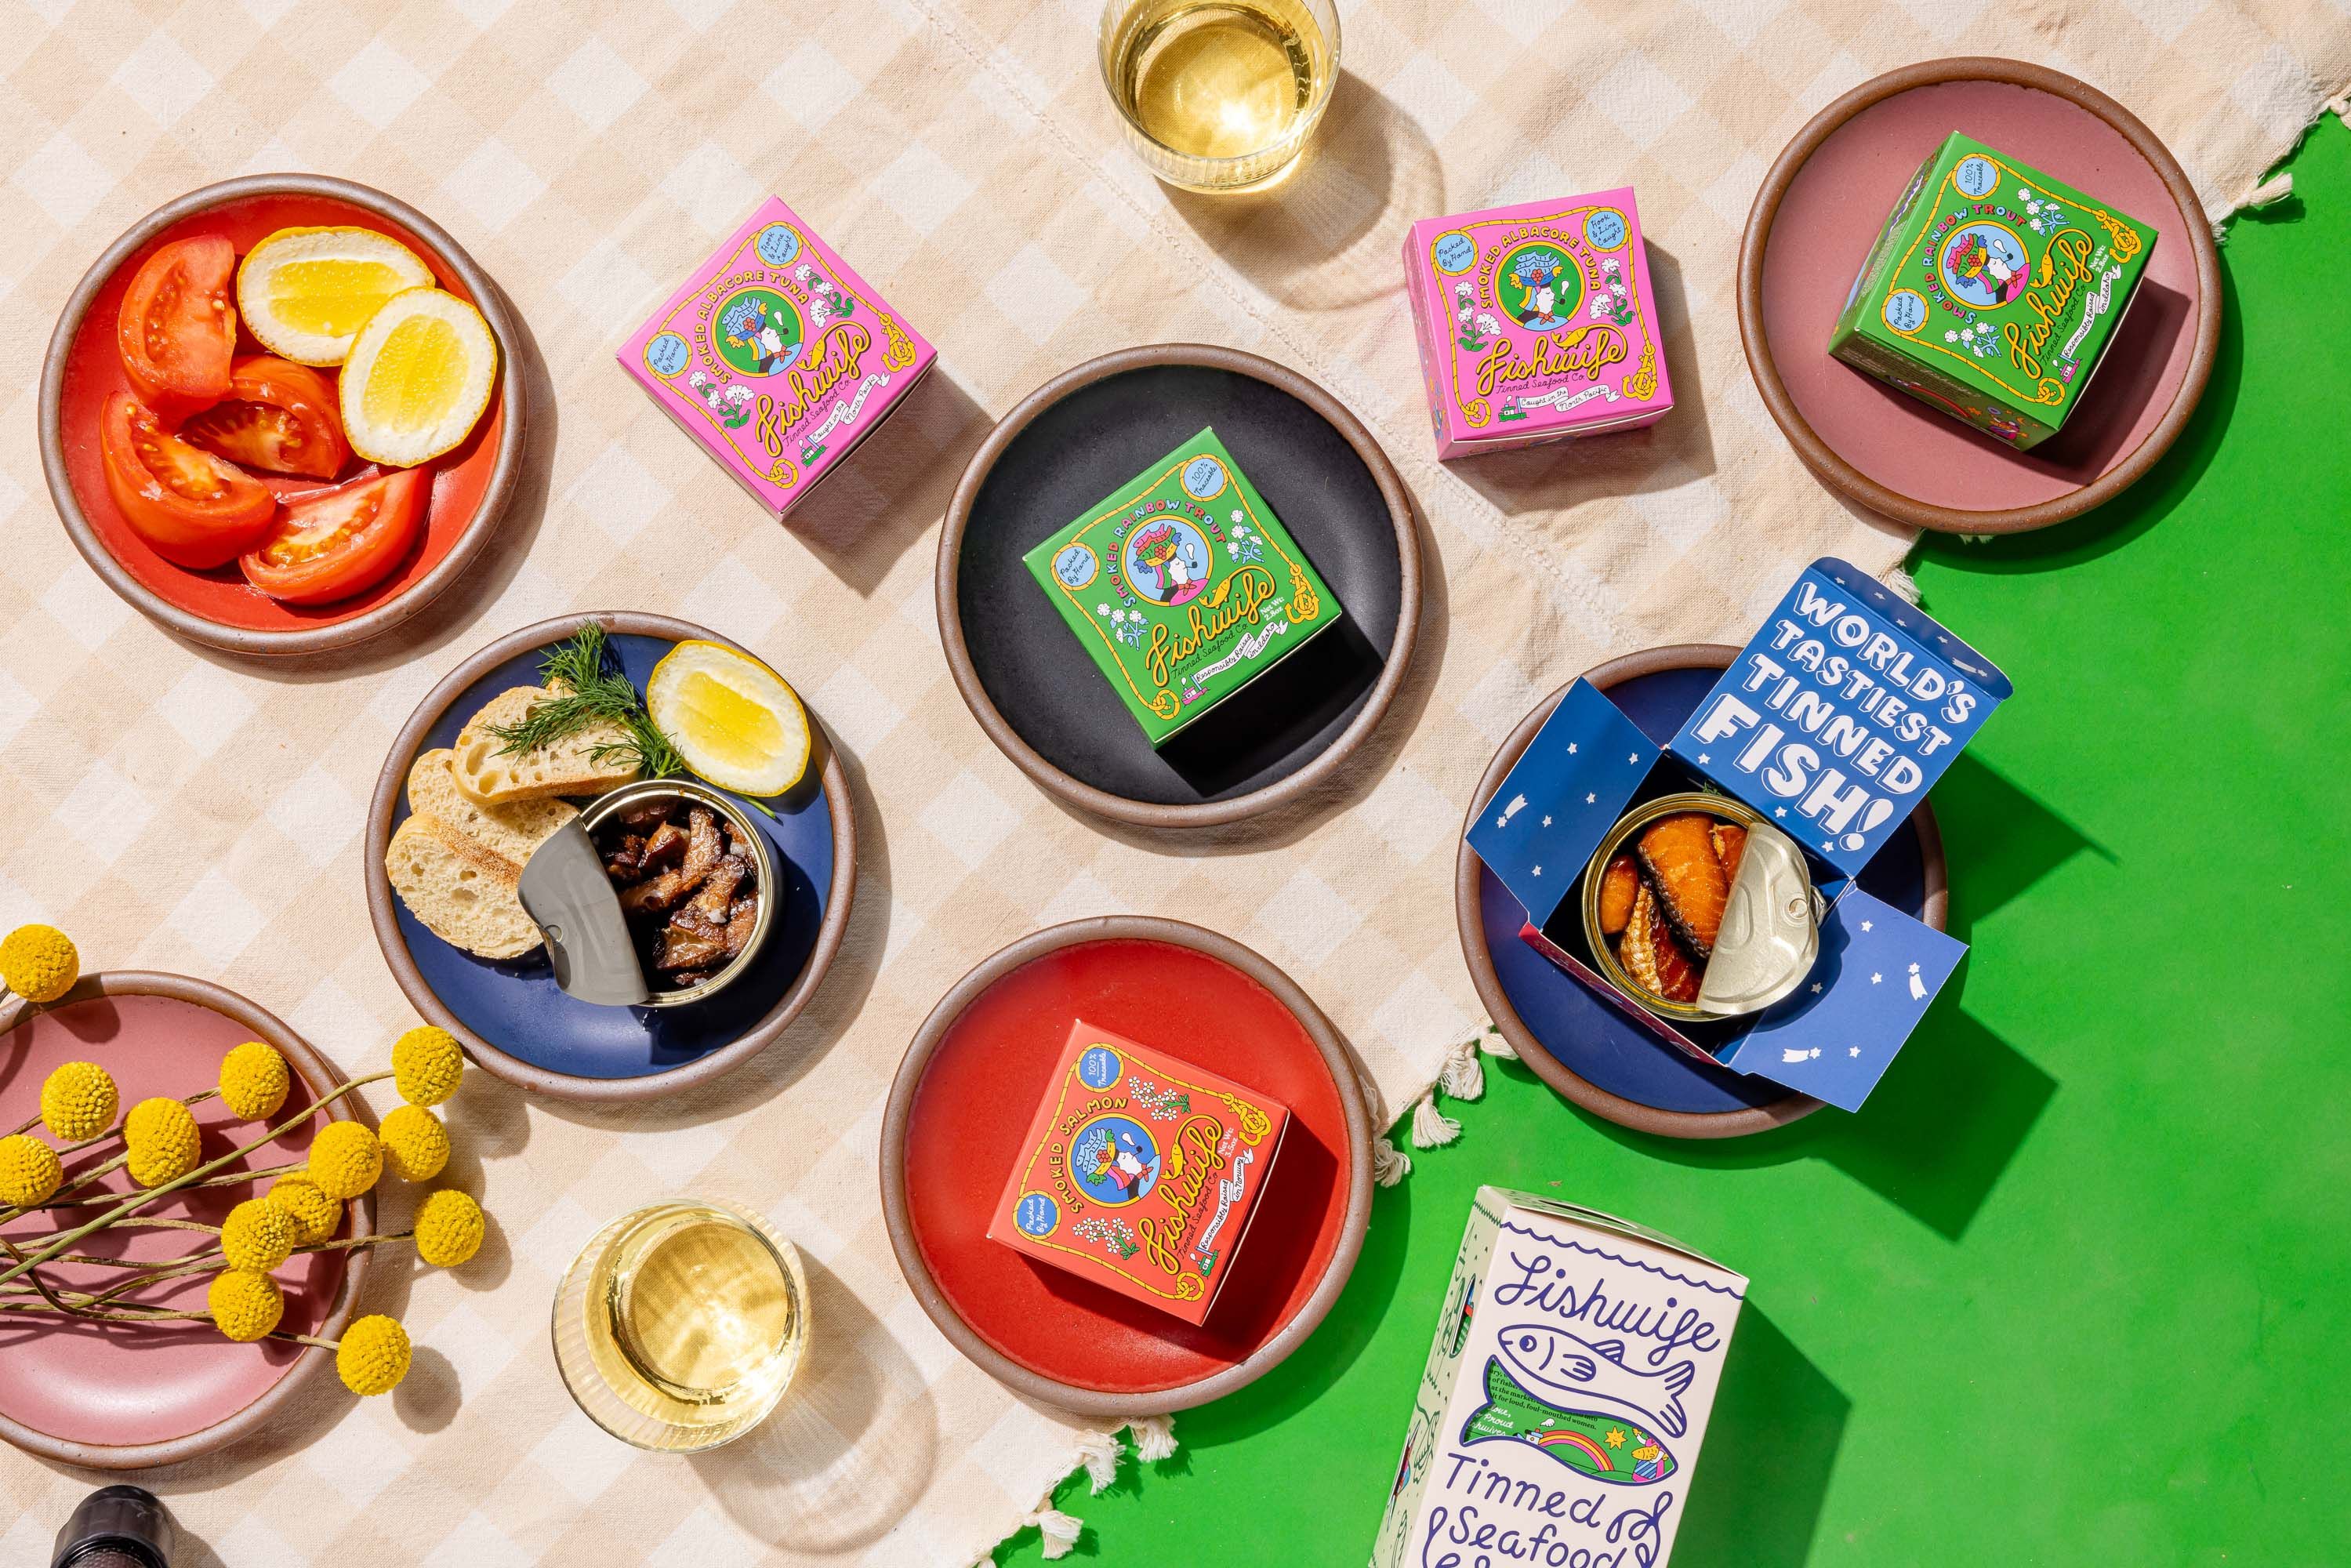 A spread of small ceramic plates in red, pink, blue and black colors, surrounded by illustrated tinned fish boxers in pink green and orange. On the plates are tinned fish, sliced bread, tomatoes, and lemons, and surrounded are flowers and wine in a glass.